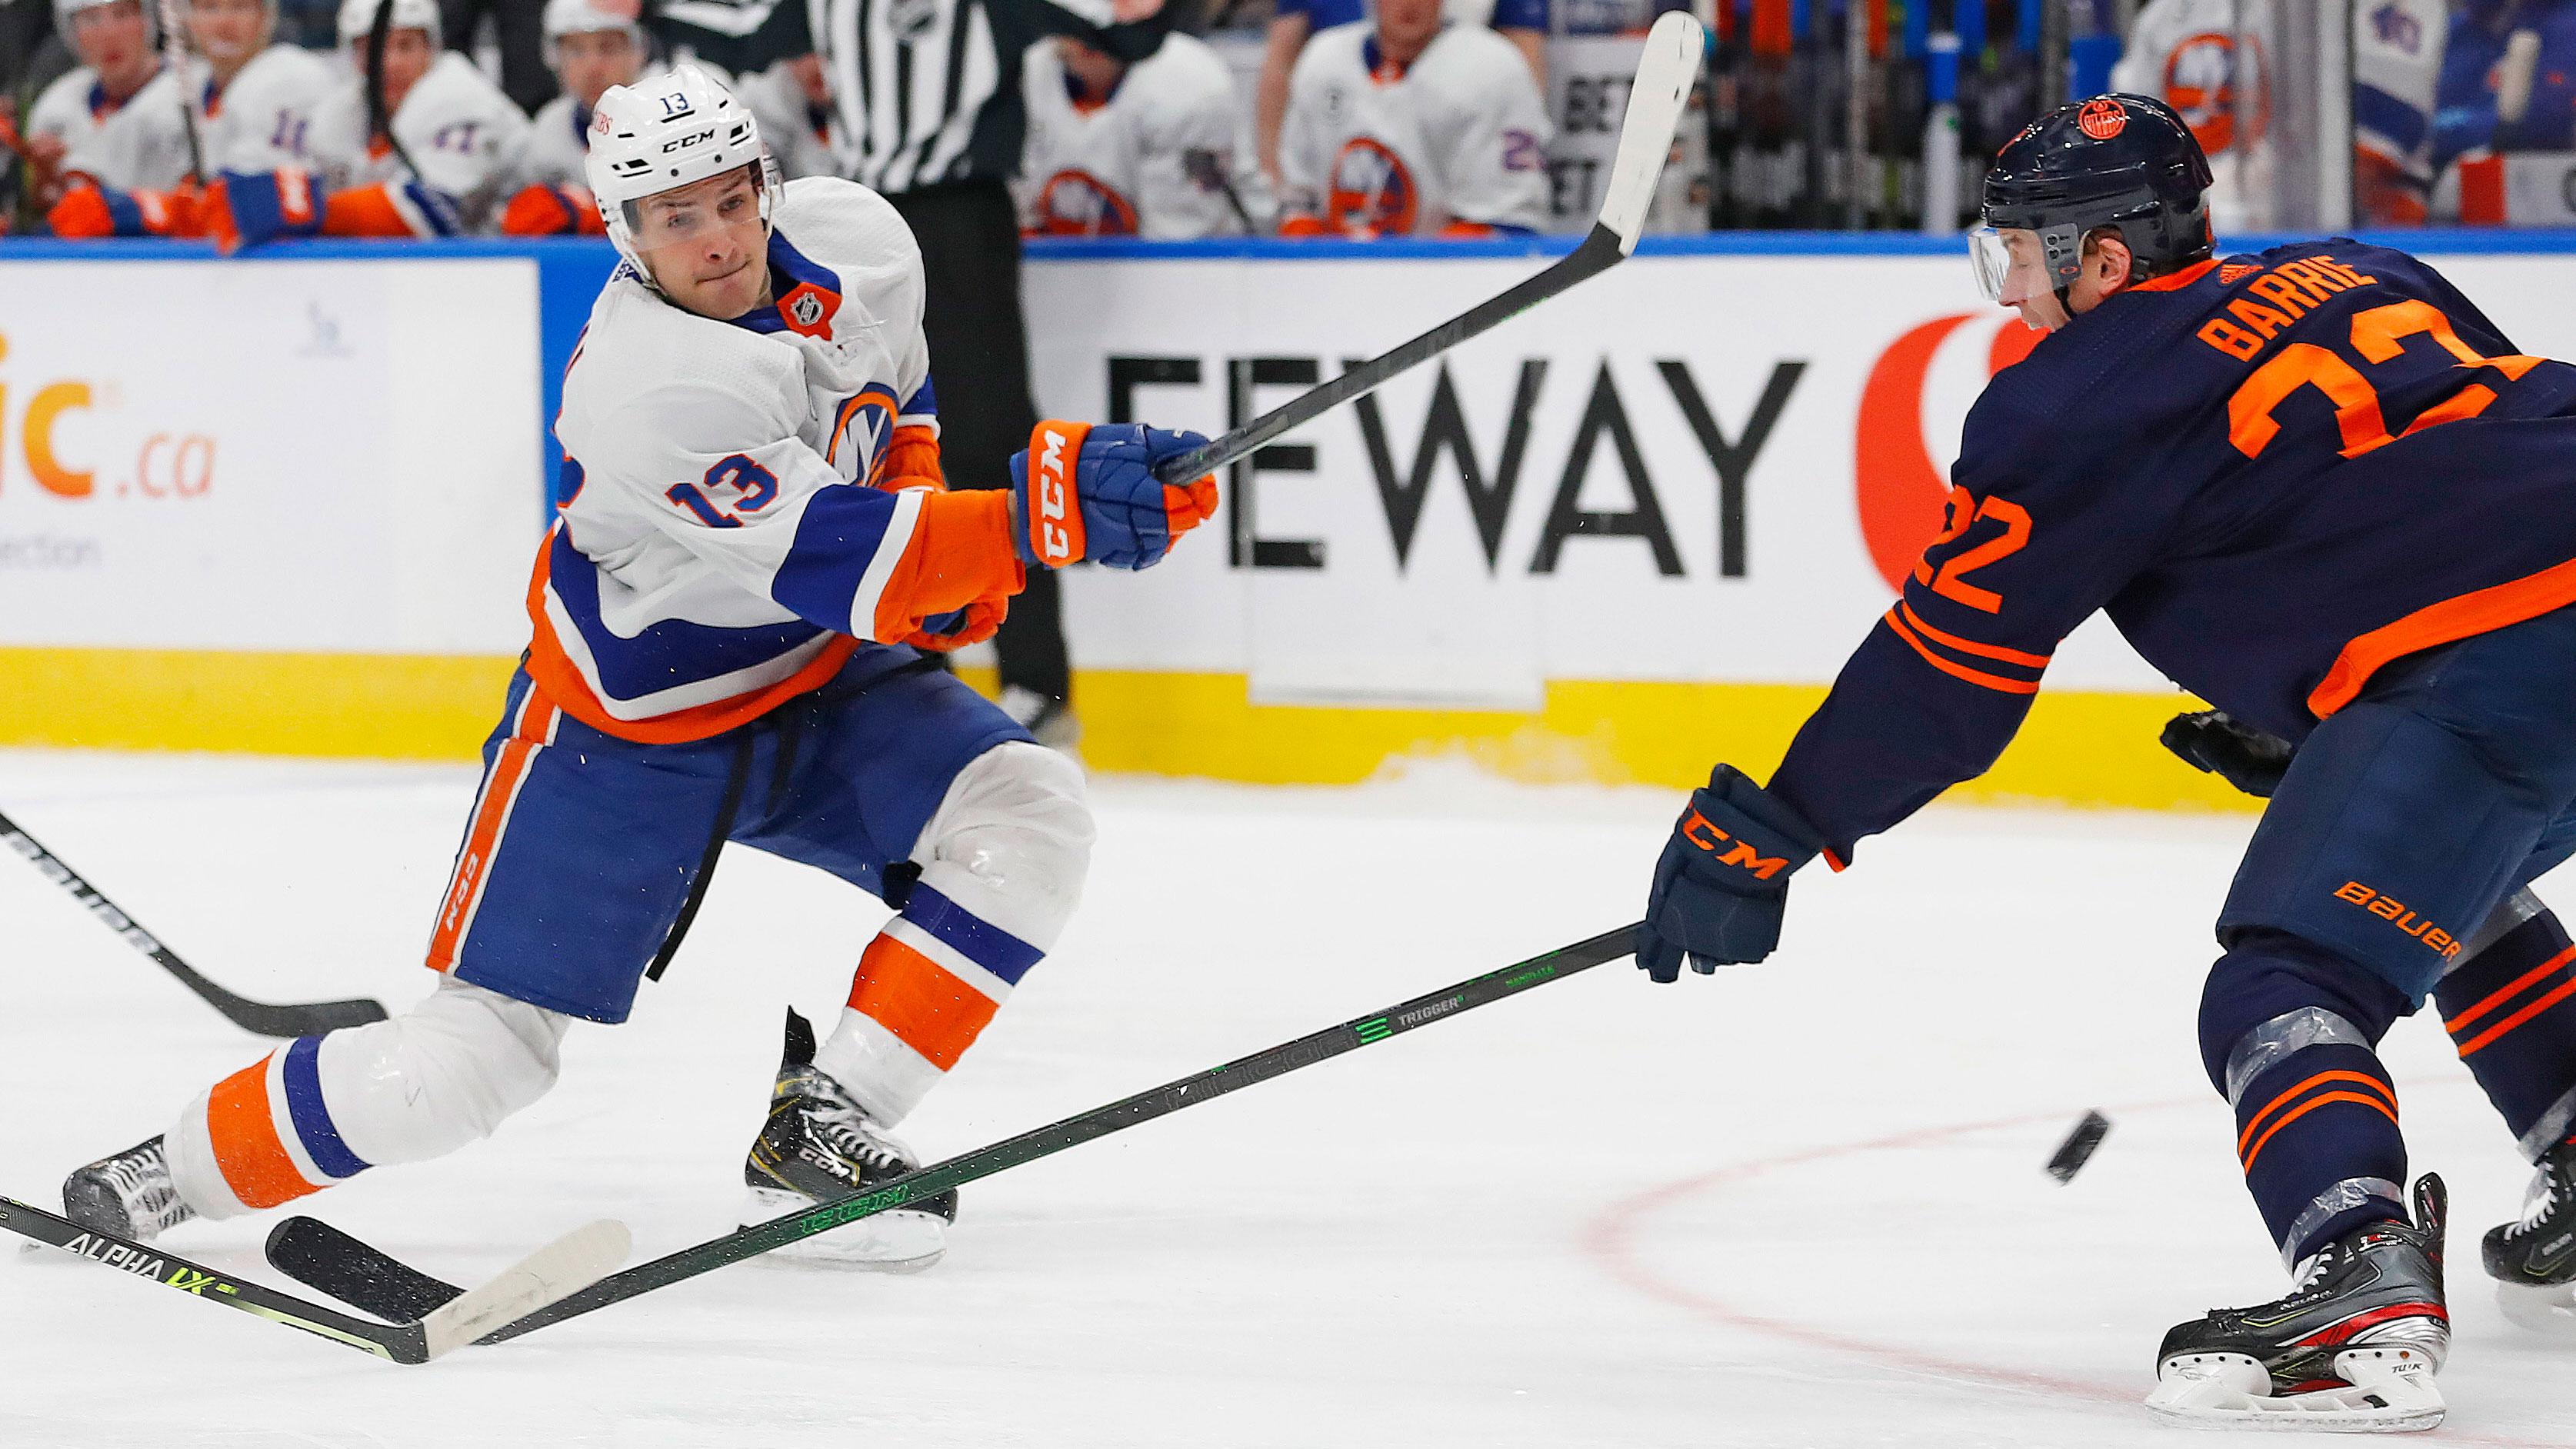 Feb 11, 2022; Edmonton, Alberta, CAN; New York Islanders forward Matt Barzal (13) takes a shot in front of Edmonton Oilers defensemen Tyson Barrie (22) during the second period at Rogers Place. / Perry Nelson-USA TODAY Sports